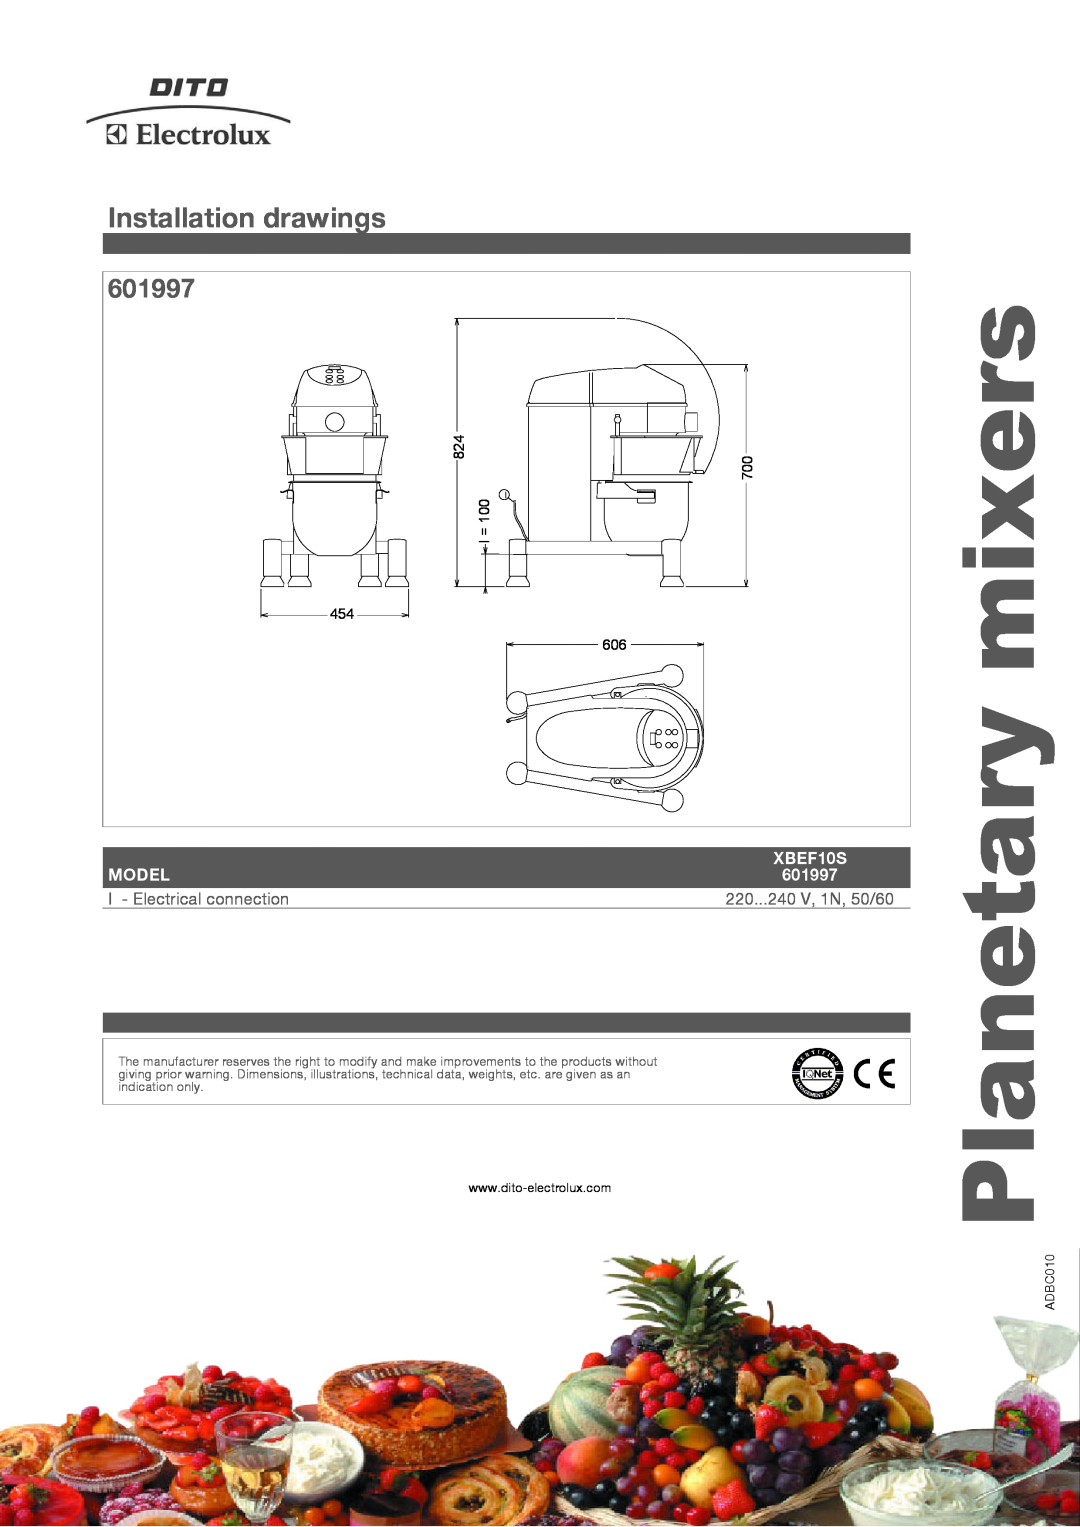 Electrolux XBEF10S Installation drawings, 601997, Planetary mixers, Model, I - Electrical connection, 454 606, ADBC010 